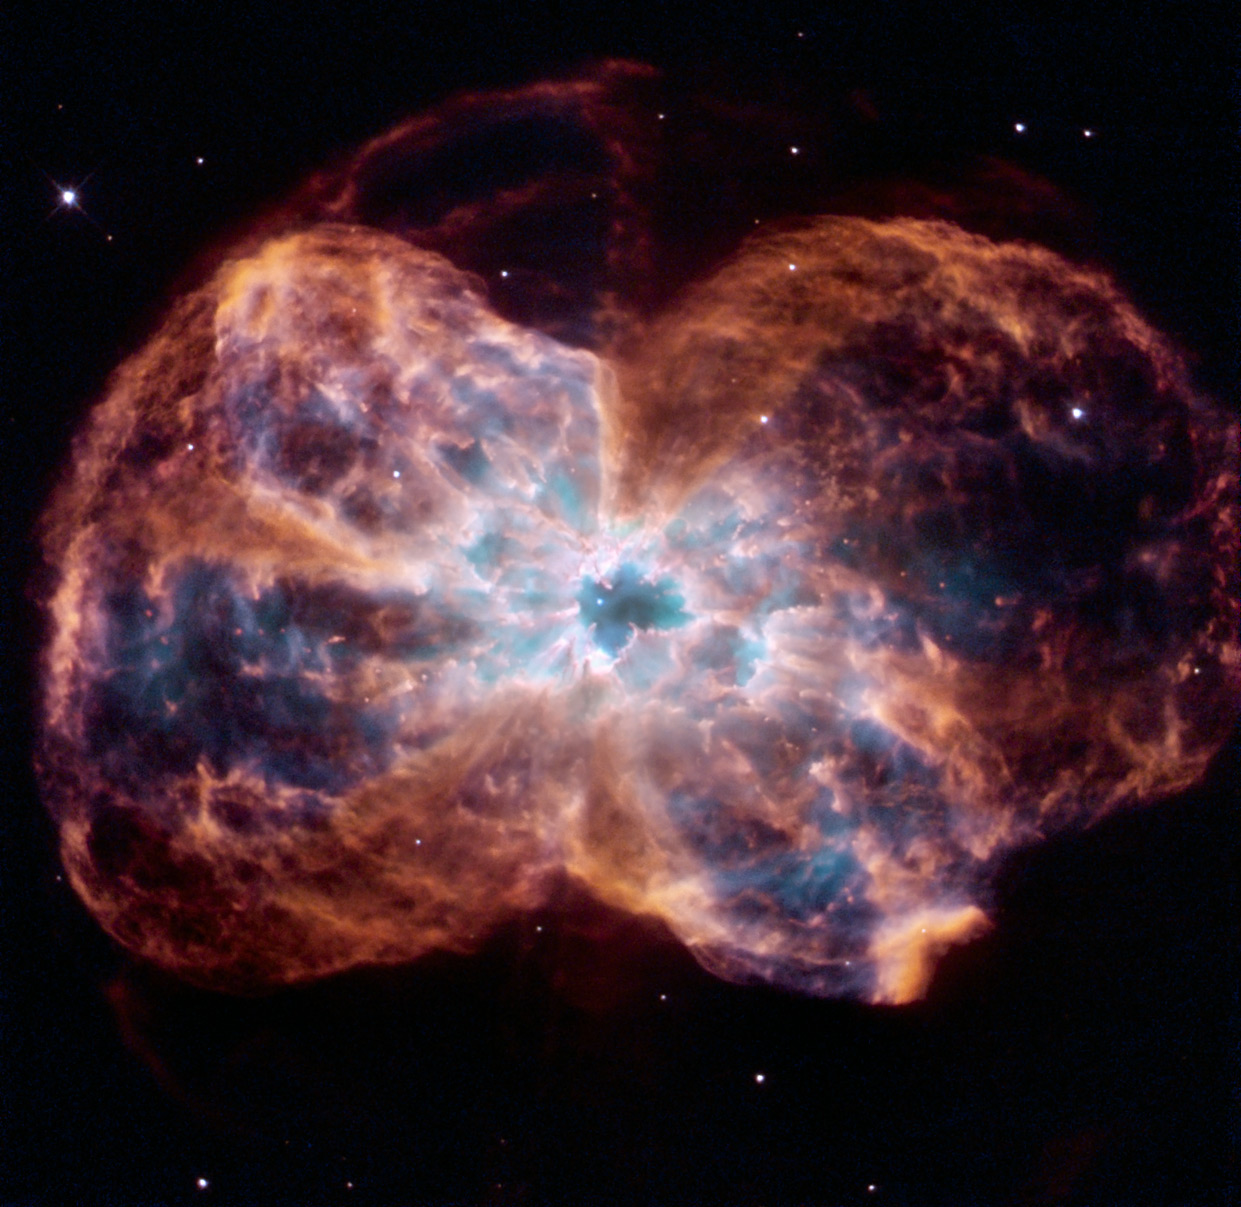 This image of NGC 2440 shows the colourful “last hurrah” of a star like our Sun. The star is ending its life by casting off its outer layers of gas, which formed a cocoon around the star’s remaining core. Ultraviolet light from the dying star makes the material glow. The burned-out star, called a white dwarf, is the white dot in the centre. Credit: NASA, ESA, and K. Noll (STScI)